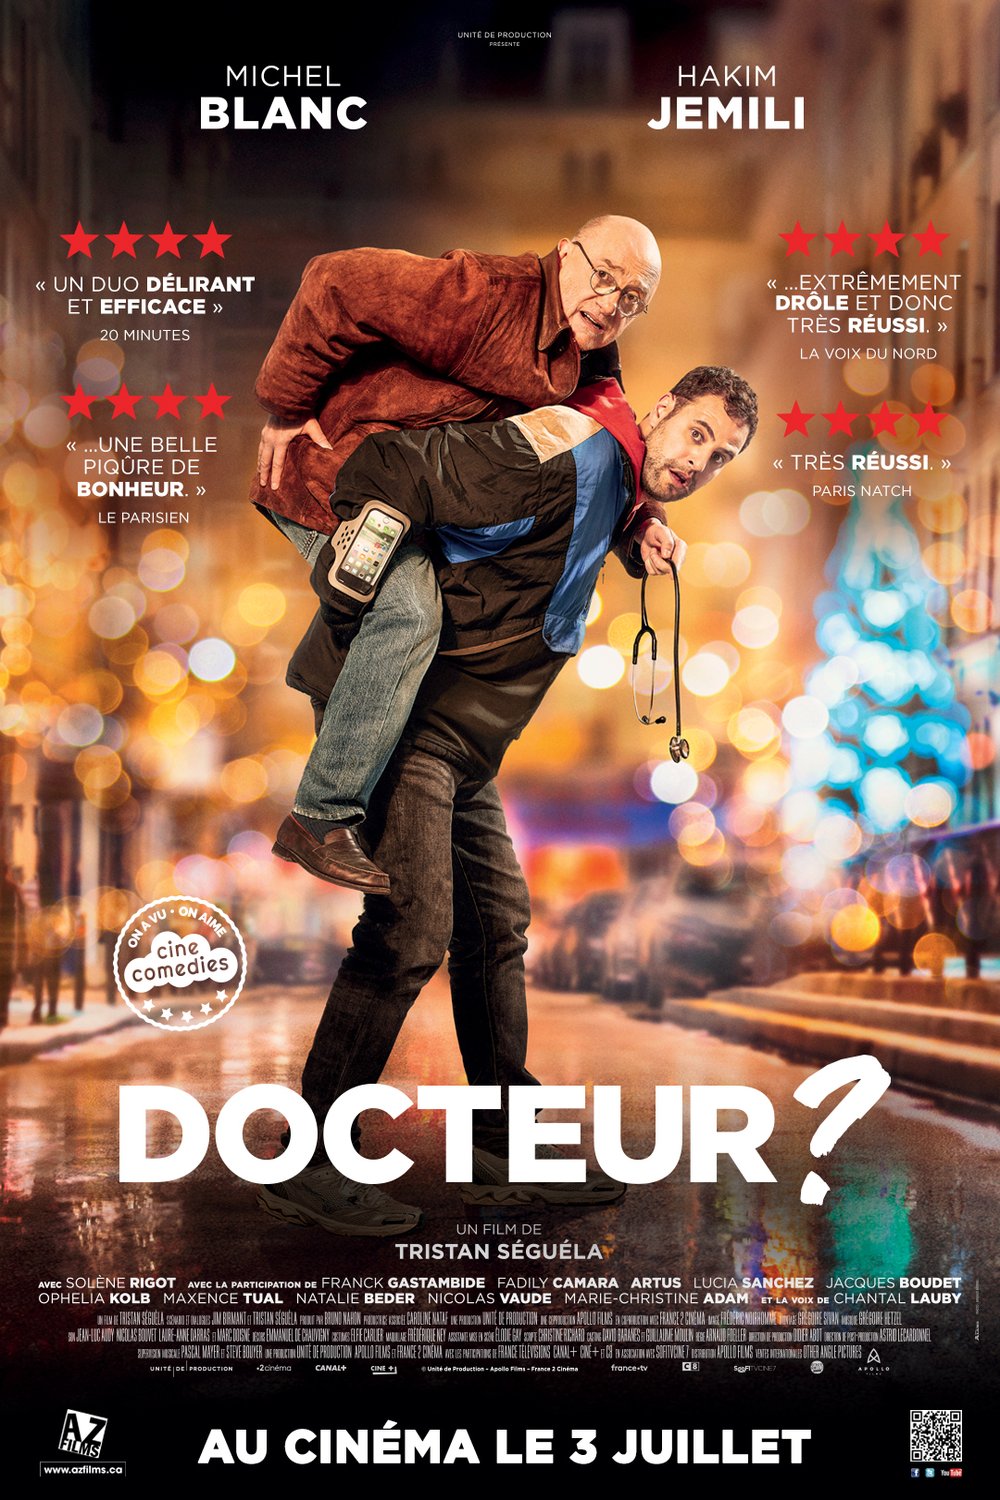 Poster of the movie Docteur?